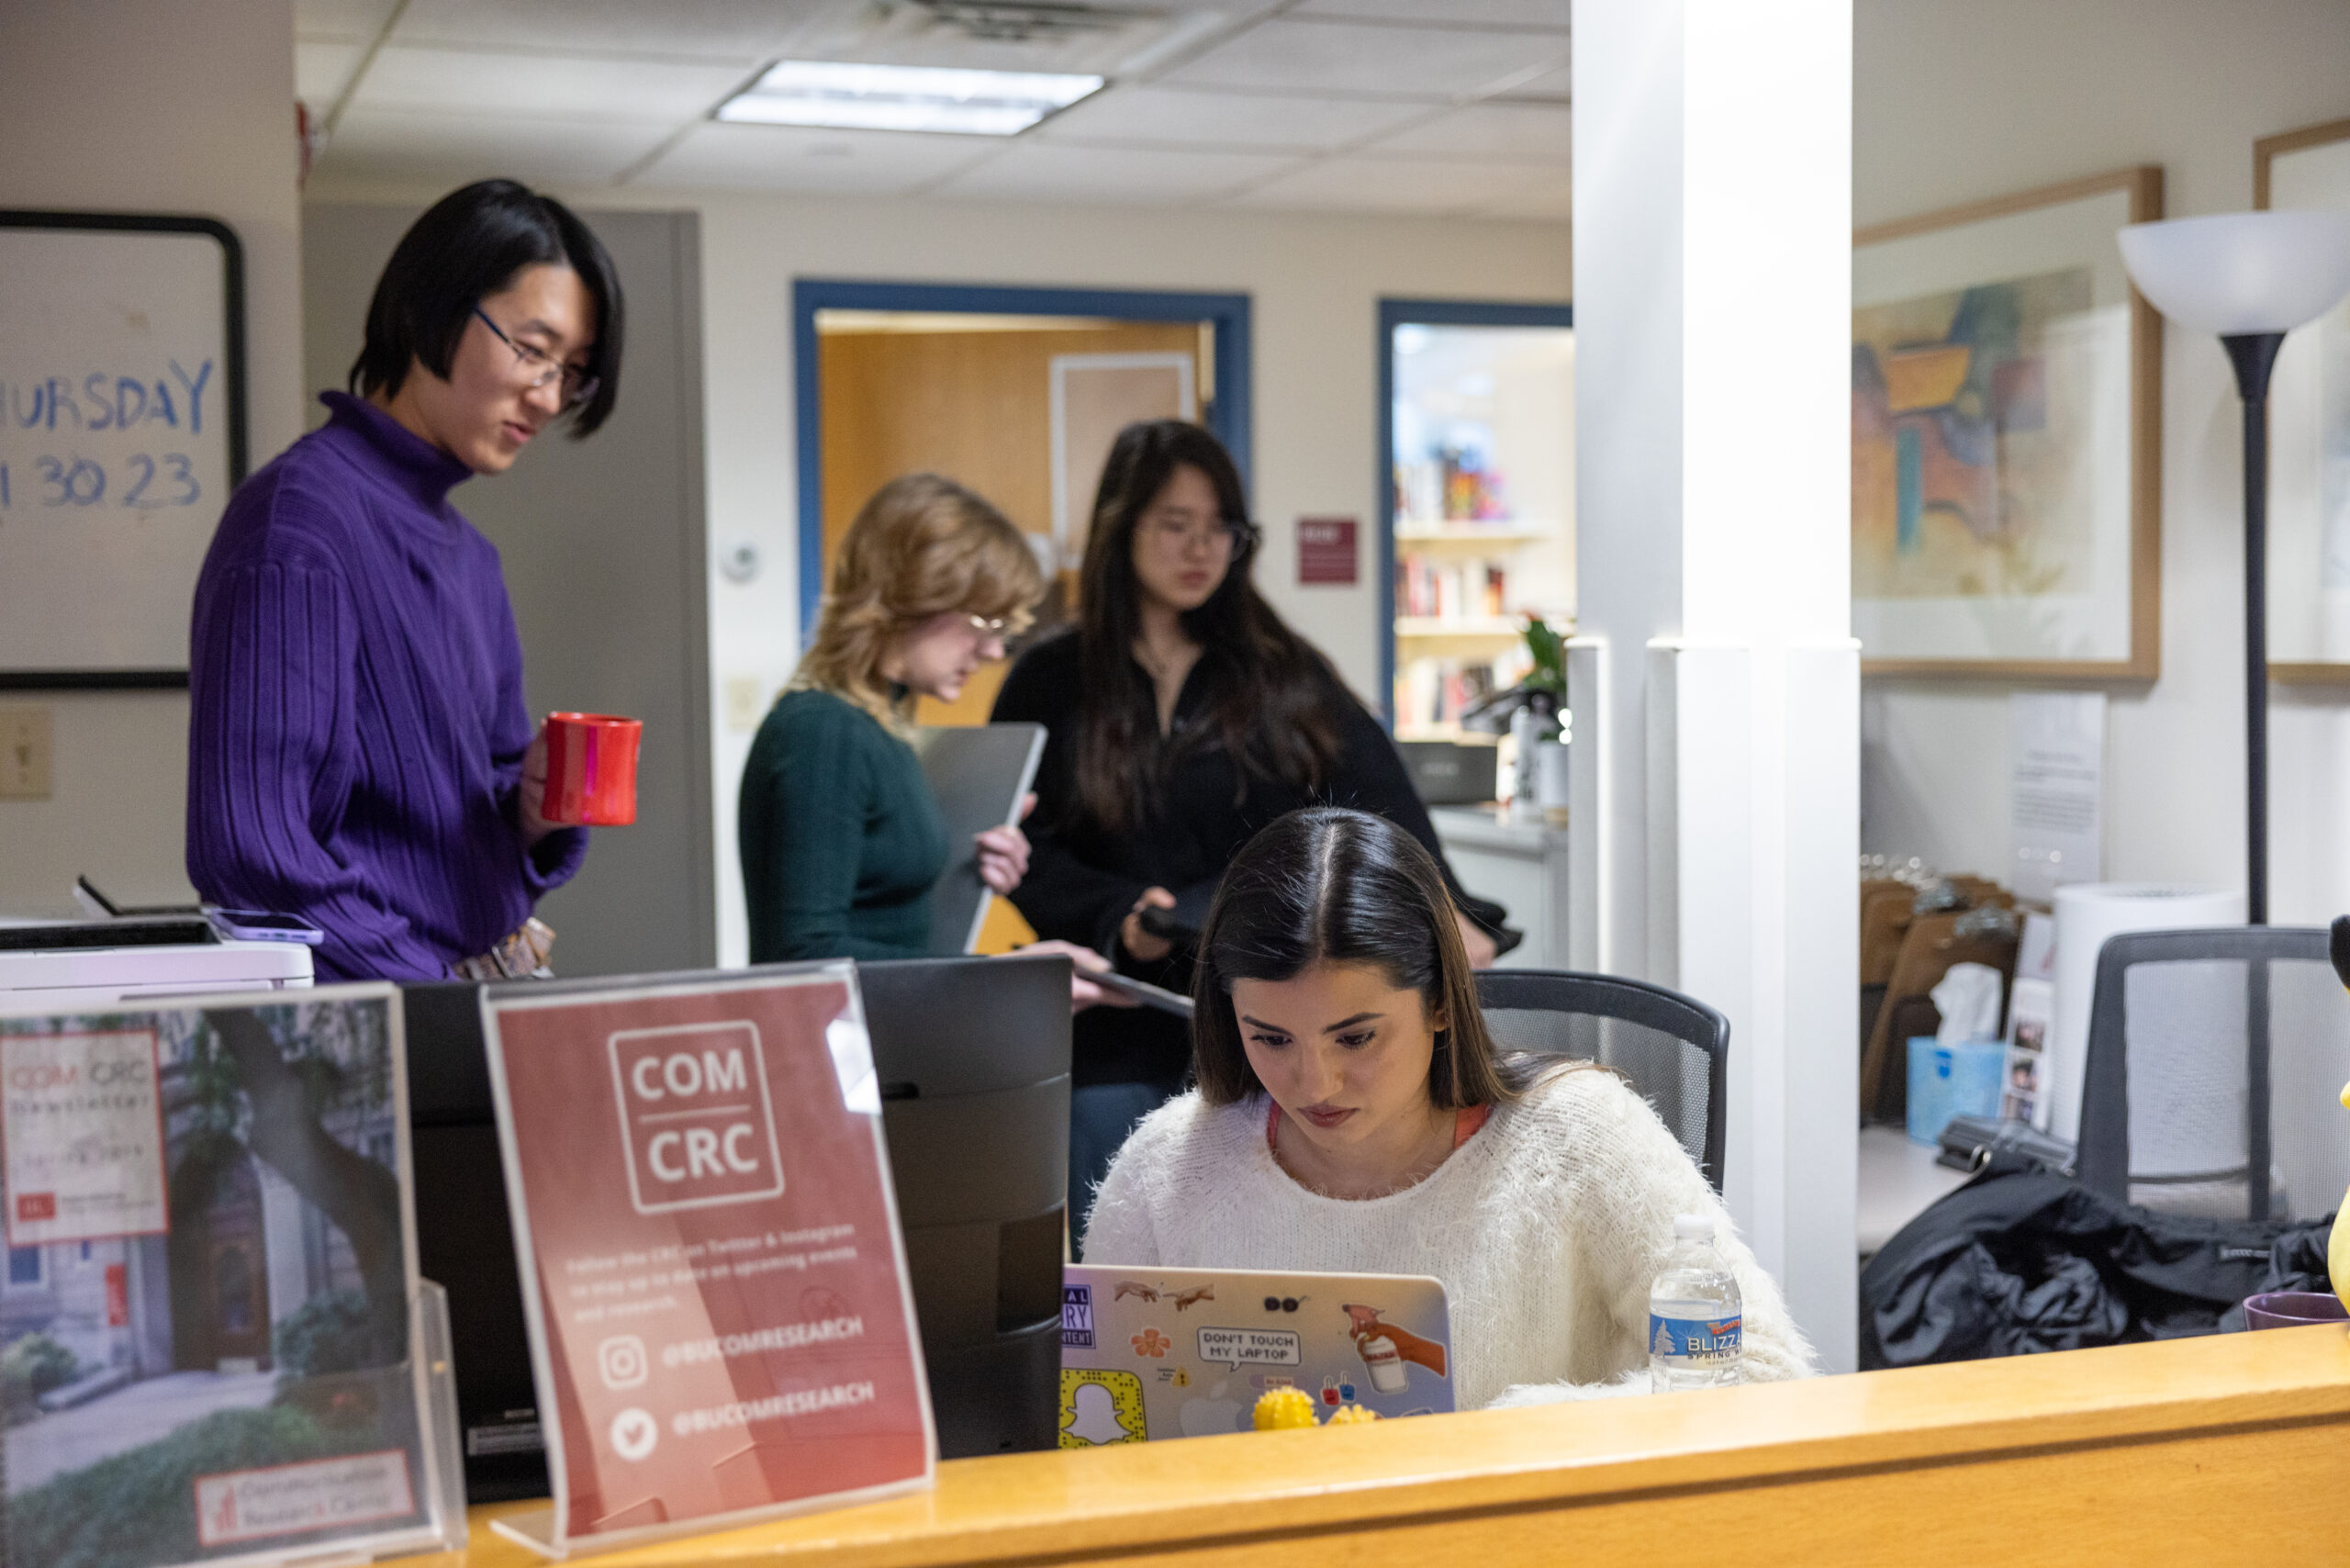 The CRC staff behind the reception desk in various stages of working and communication.